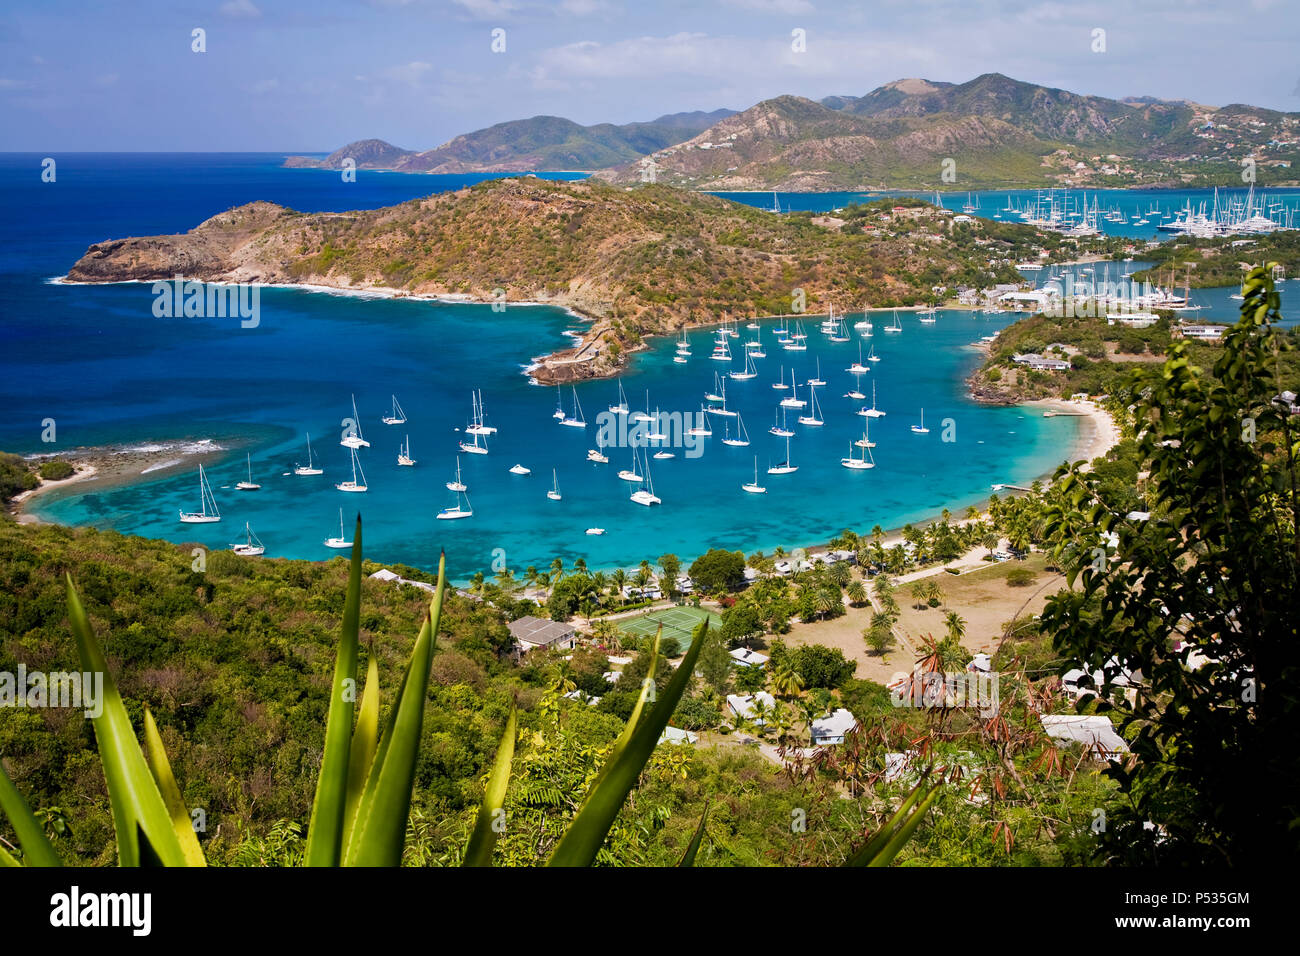 Dozens of sailboats and yachts in the little blue green harbour in tropical Antigua Stock Photo